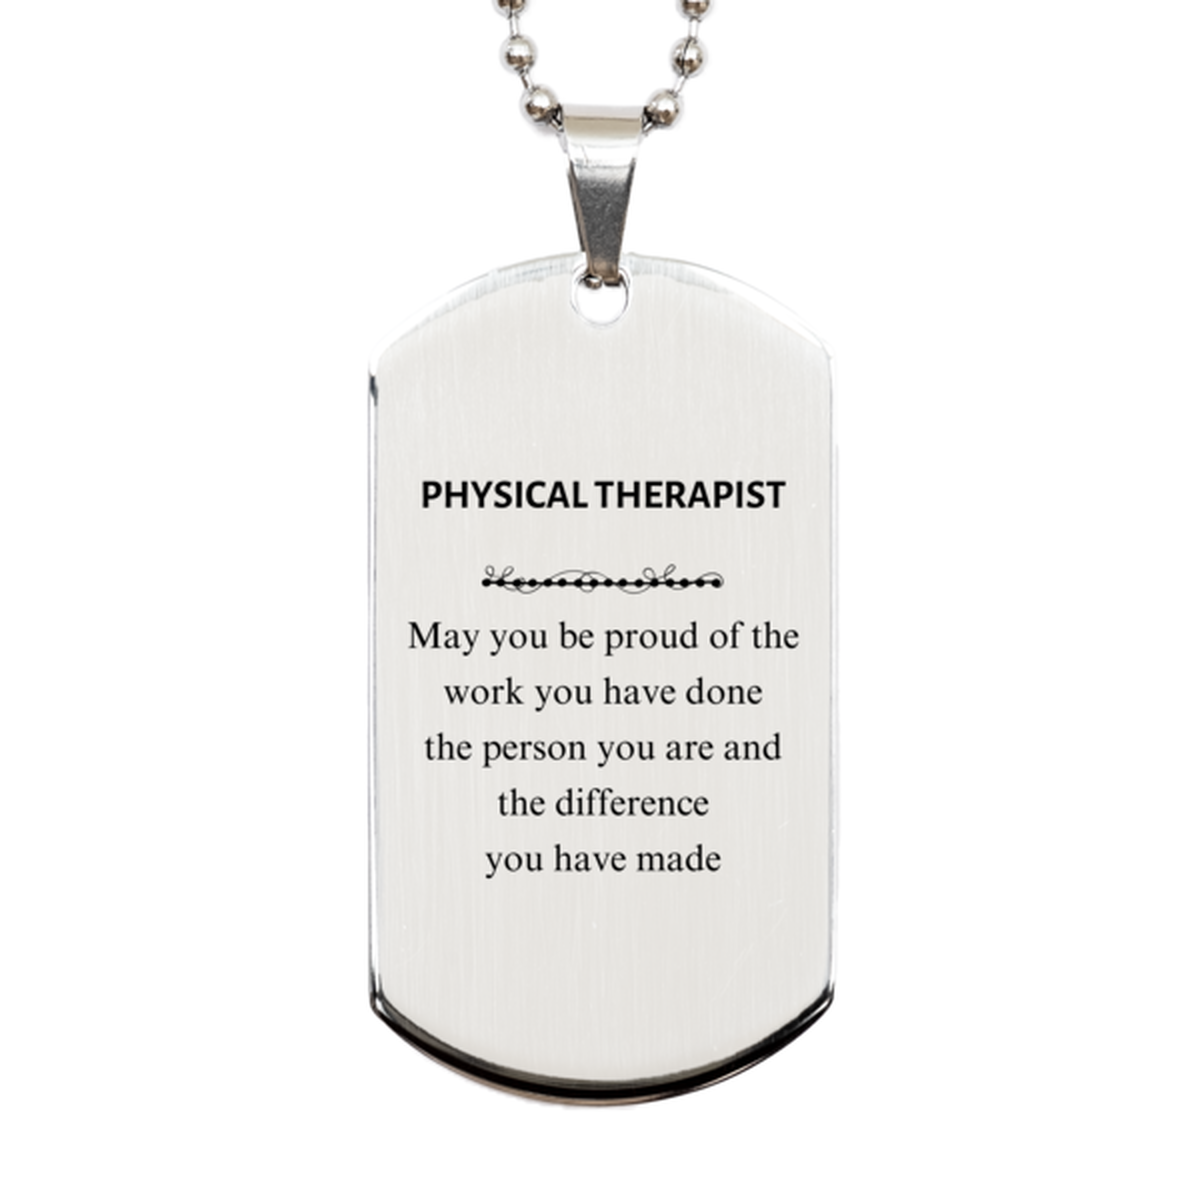 Physical Therapist May you be proud of the work you have done, Retirement Physical Therapist Silver Dog Tag for Colleague Appreciation Gifts Amazing for Physical Therapist